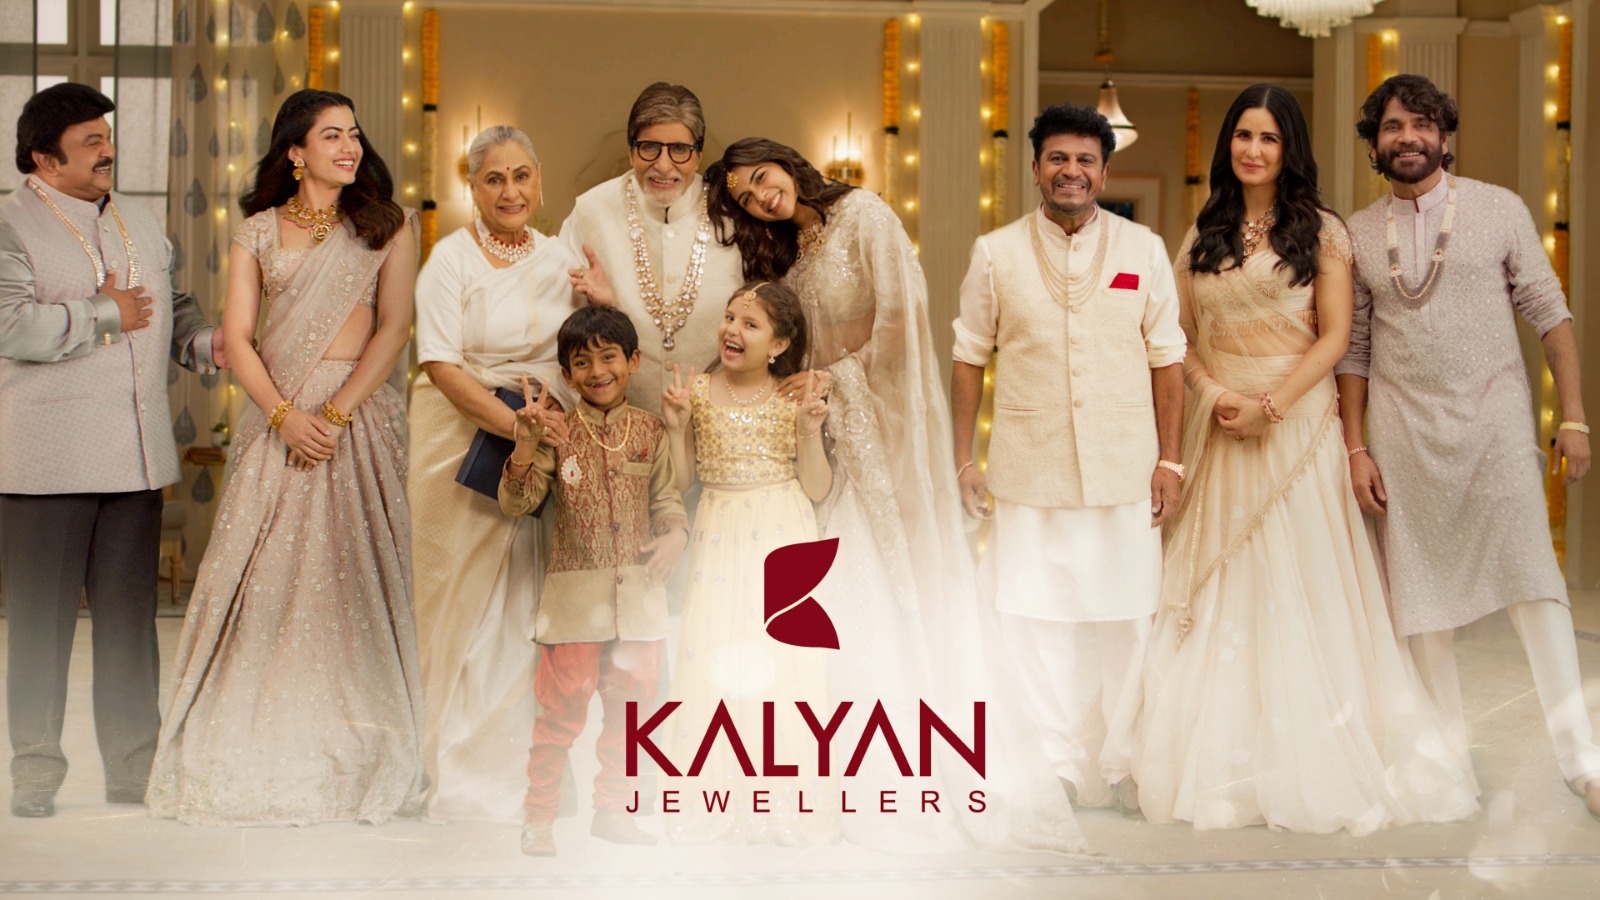 Kalyan Jewellers’ multi-star campaign with  celebrities this Diwali introduces gold coins of Lord Ganesha and Goddess Lakshmi!